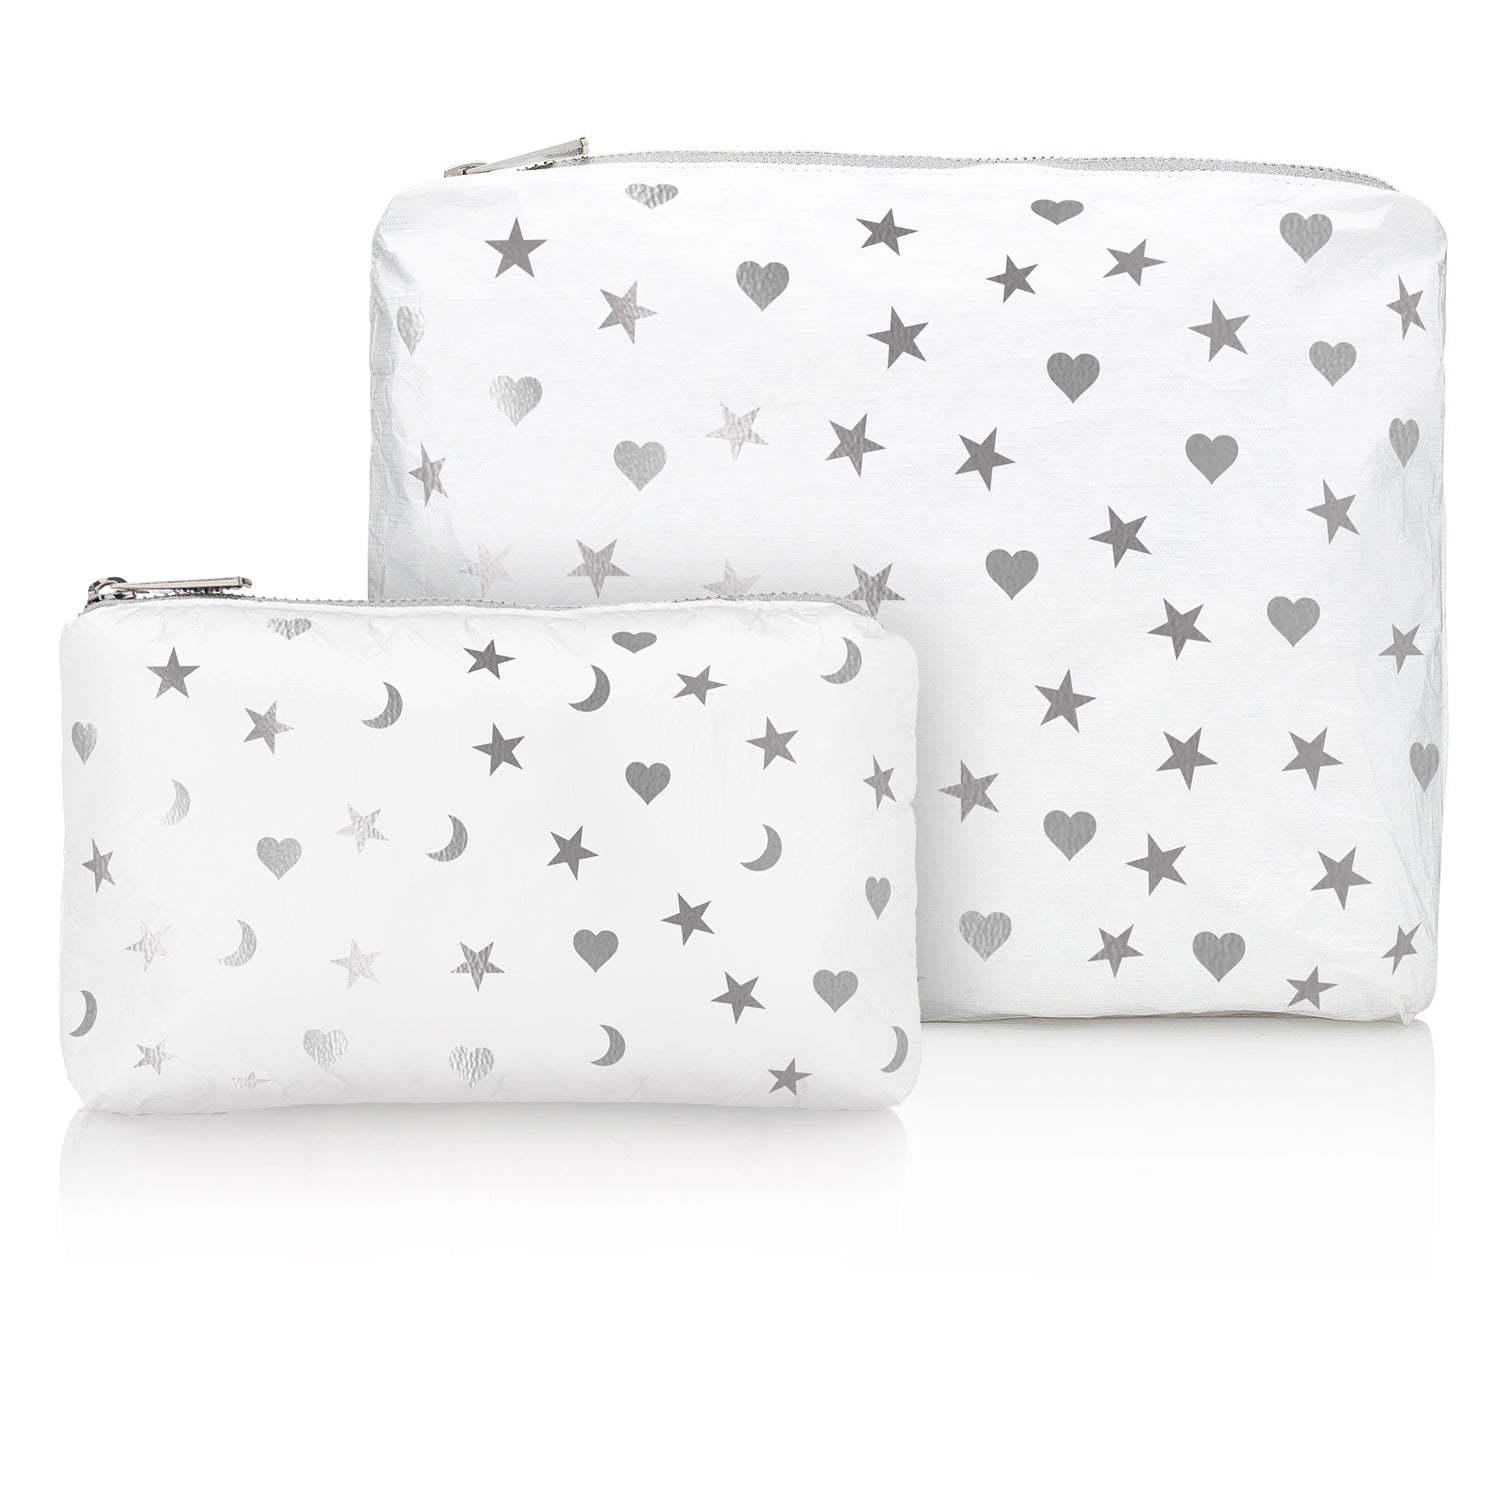 Set of Two - Organizational Packs - Shimmer White with Heart, Moon and Stars